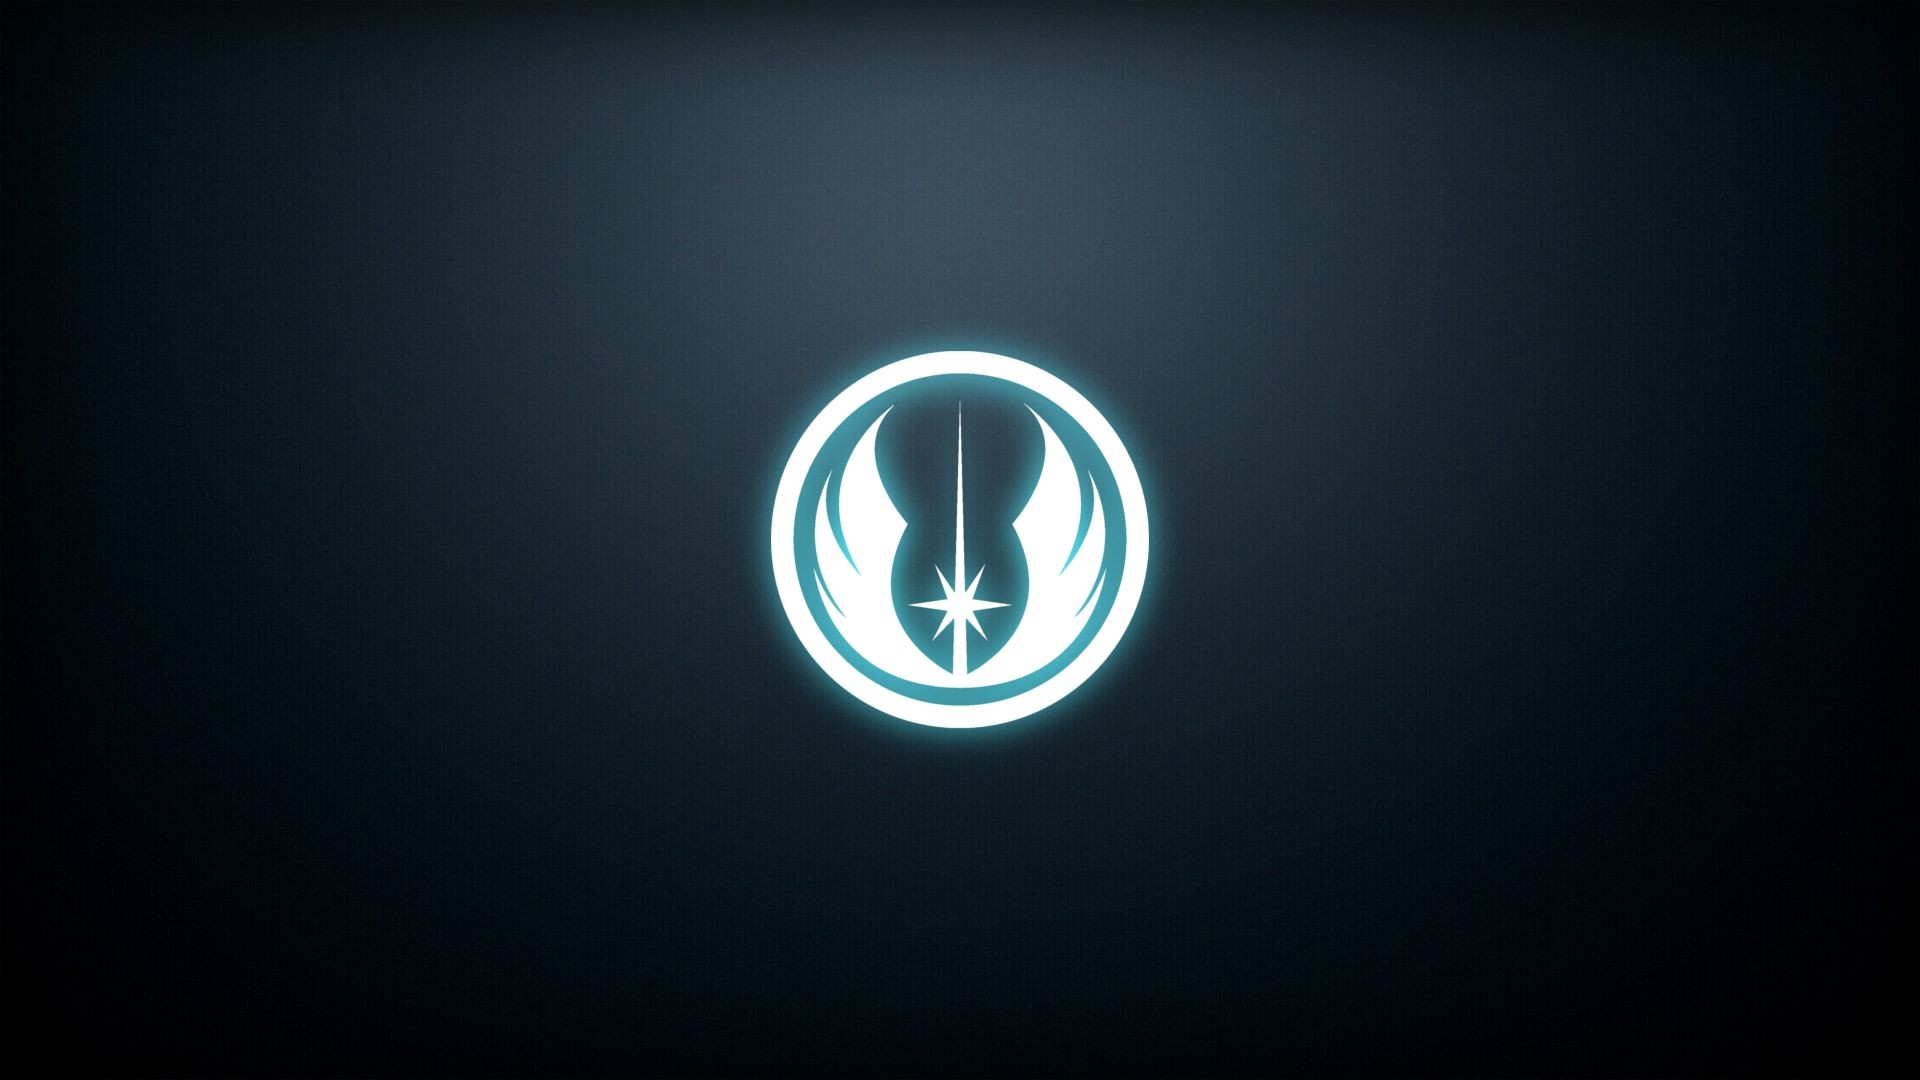 1920x1080 A wallpaper you guys might like. The Jedi Order emblem. I'll do a Sith one  too if people want me to. [].